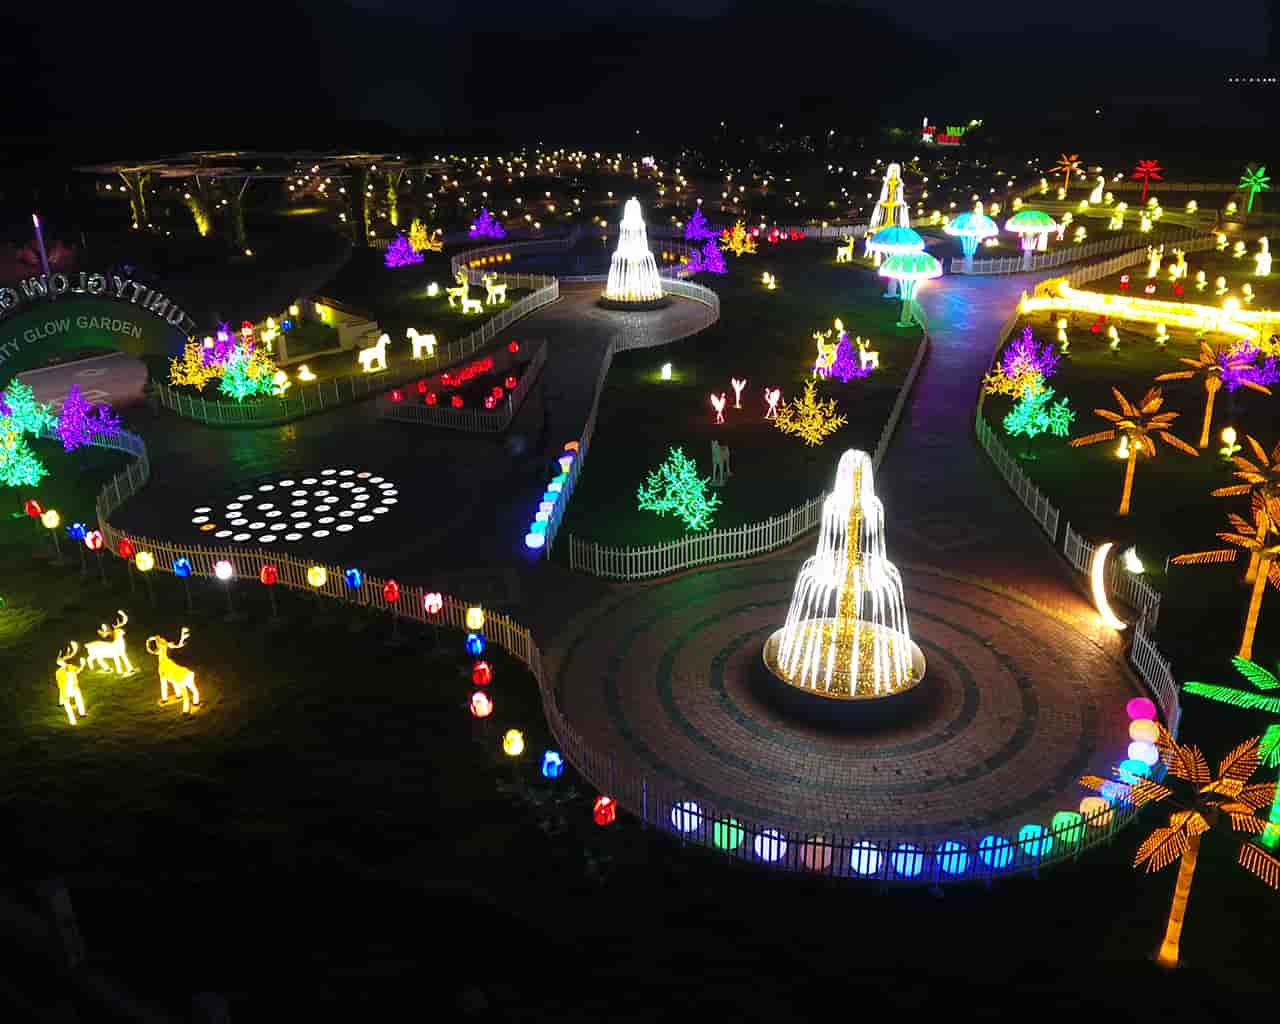 The unity glow garden bestowed with colorful and stunning visuals